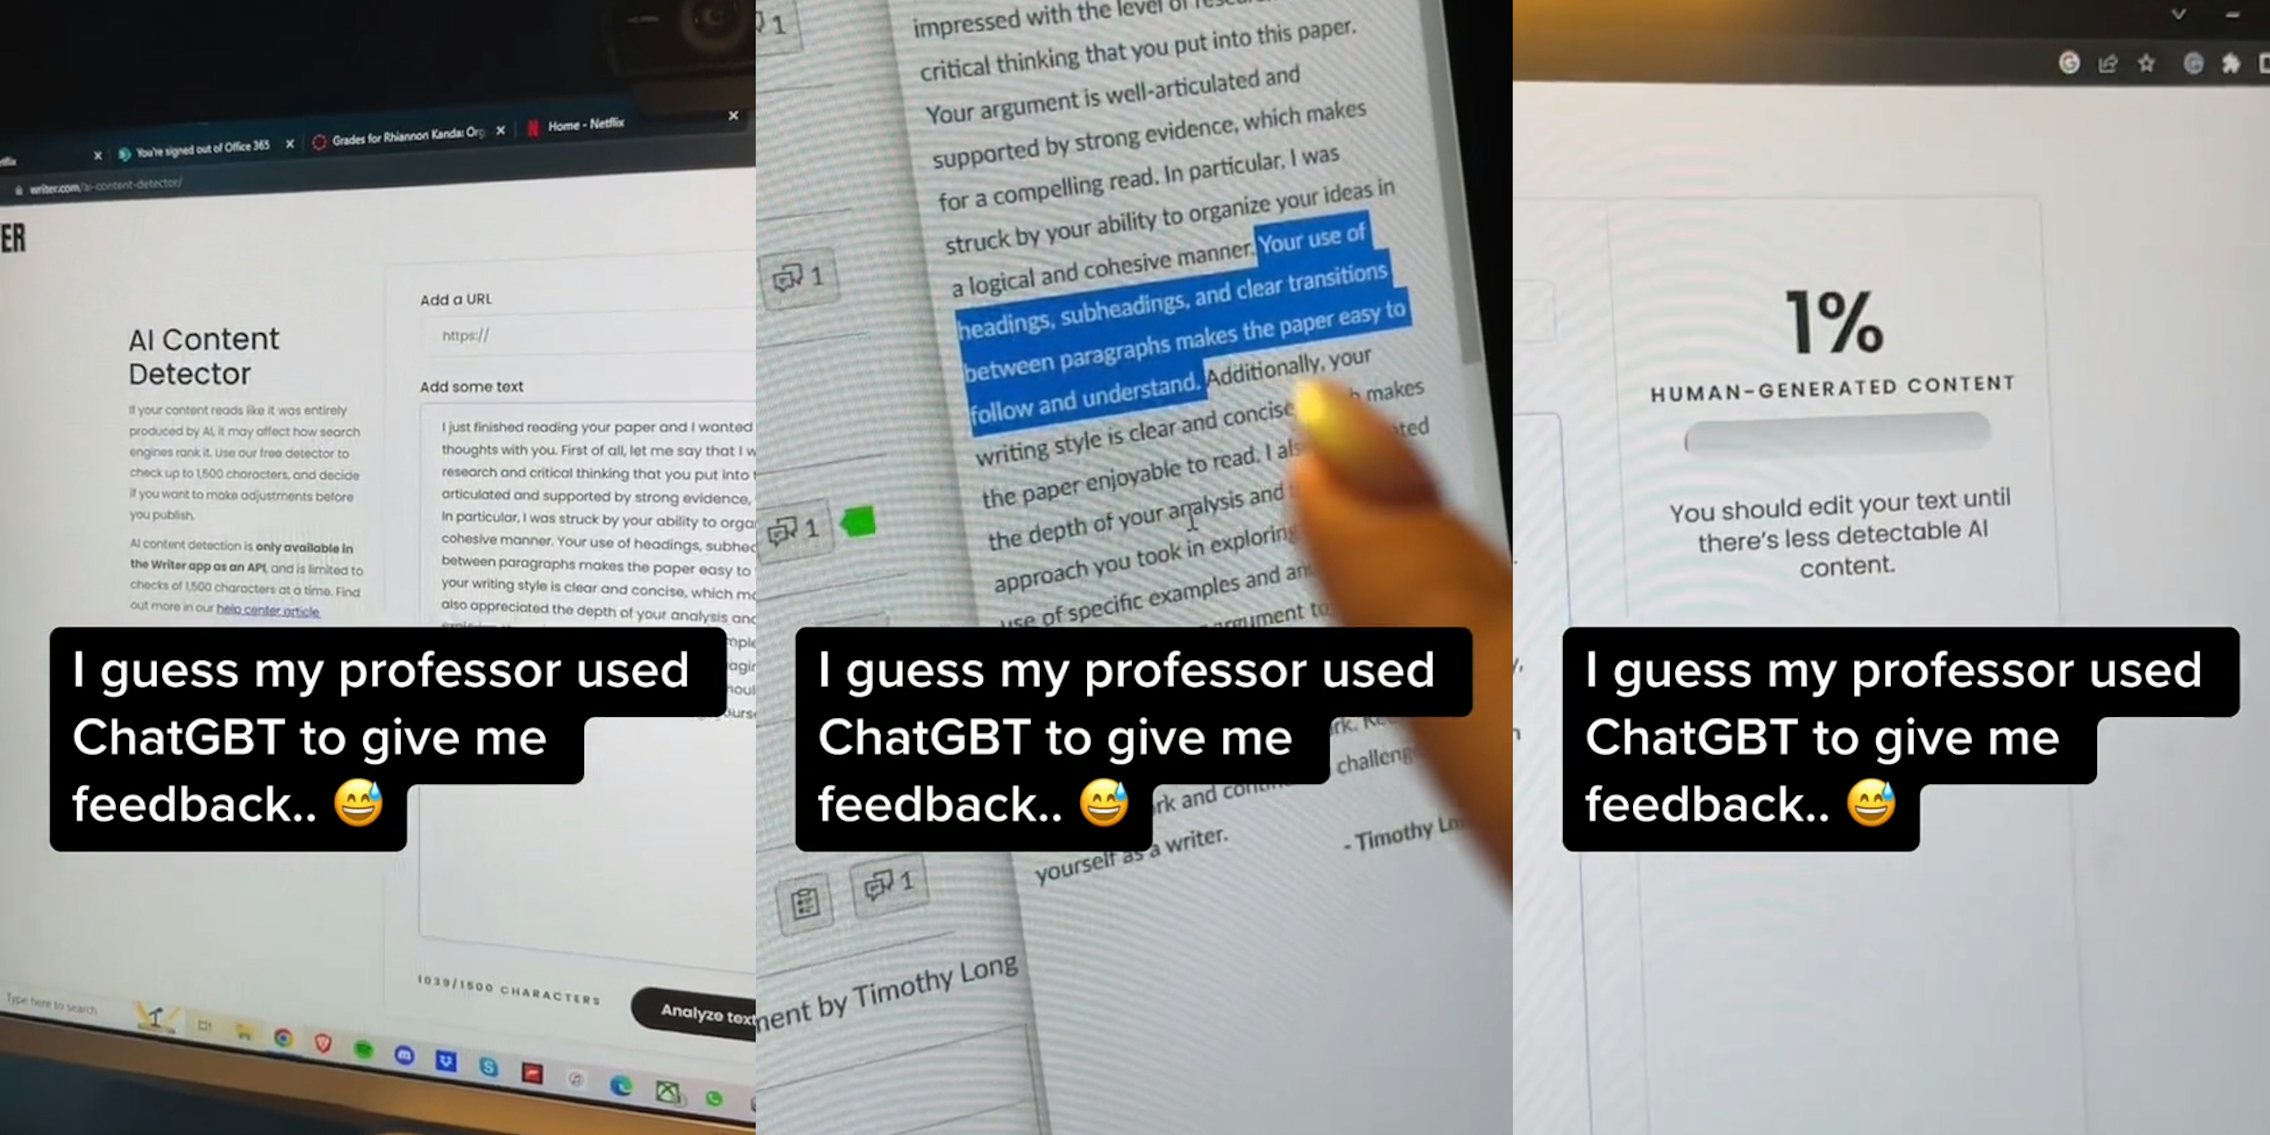 computer screen on Ai Content Detector website with caption 'I guess my professor used ChatGBT to give me feedback' (l) computer screen with finger pointing to professor's grading with caption 'I guess my professor used ChatGBT to give me feedback' (c) 1% human generated content on computer screen with caption 'I guess my professor used ChatGBT to give me feedback' (r)